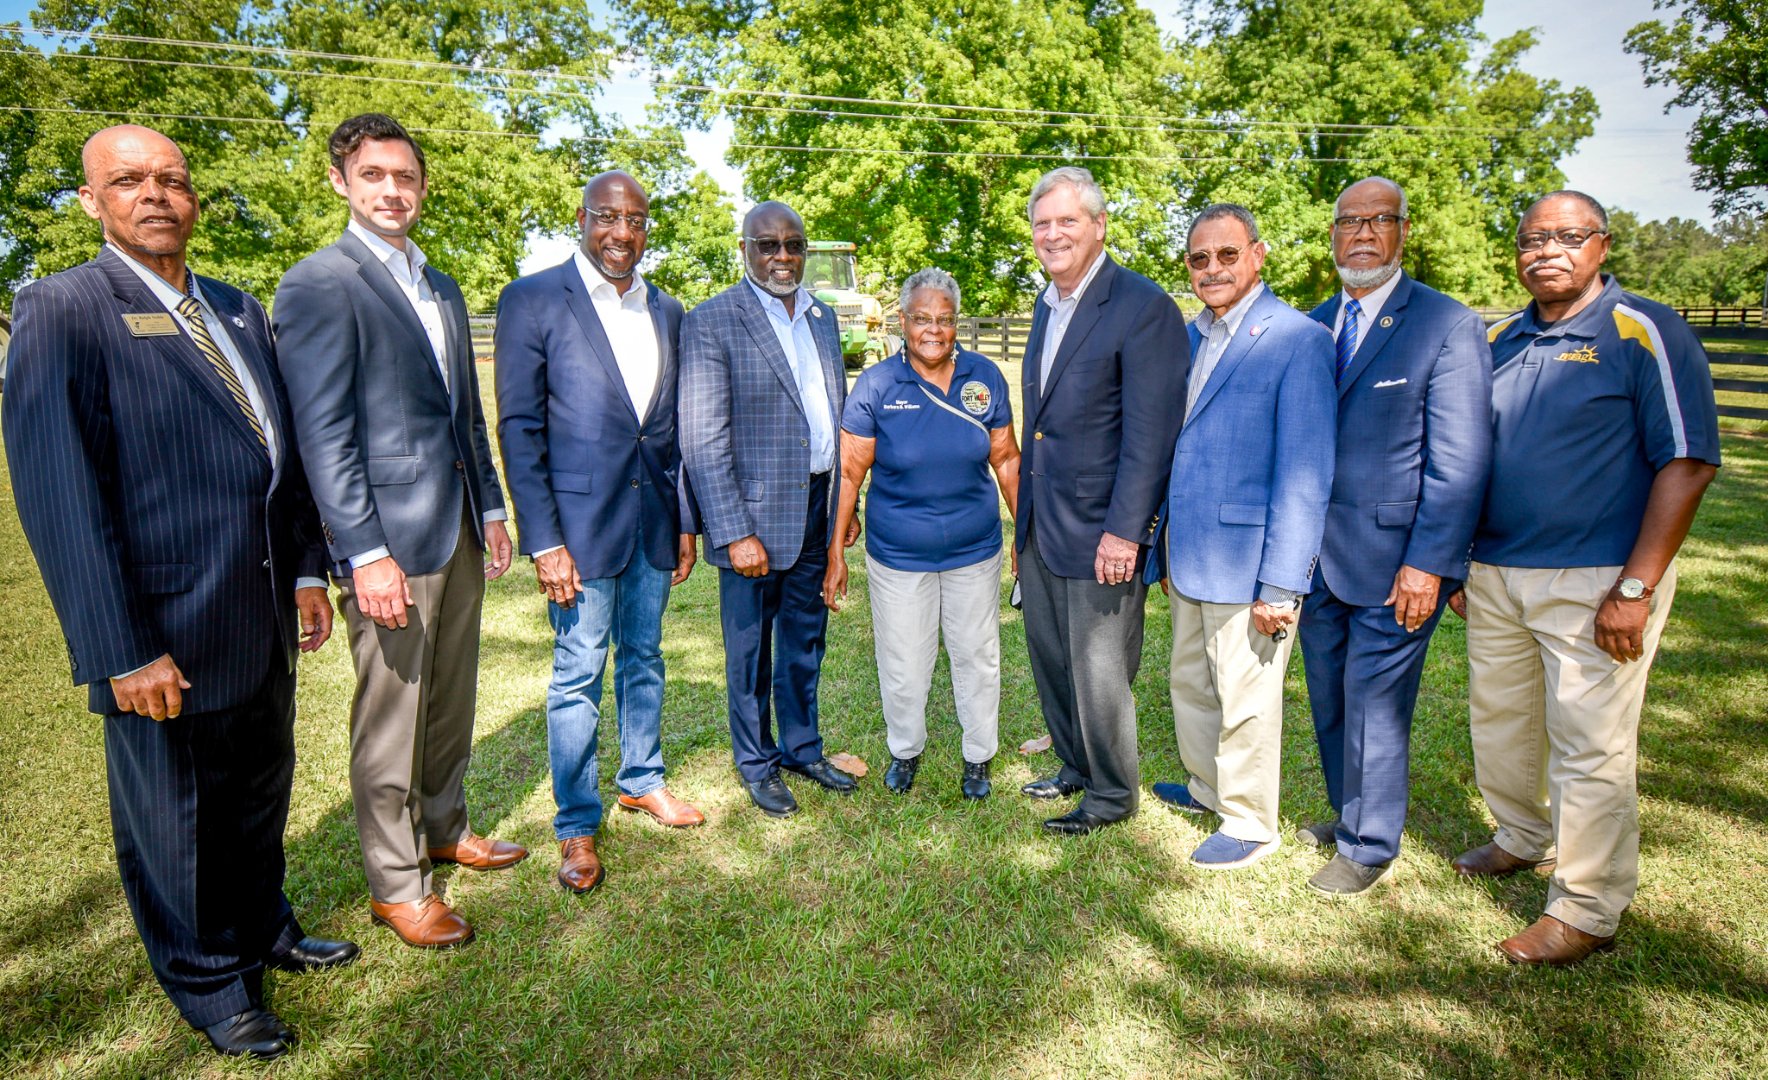 Pictured from left to right: Dr. Ralph Noble (dean of Fort Valley State University’s College of Agriculture, Family Sciences and Technology), Sen. Jon Ossoff, Sen. Rev. Raphael Warnock, FVSU President Dr. Paul Jones, Fort Valley Mayor Barbara Williams, U.S. Secretary of Agriculture Tom Vilsack, Congressman Sanford Bishop, Rep. Calvin Smyre and FVSU Extension Administrator Dr. Mark Latimore.